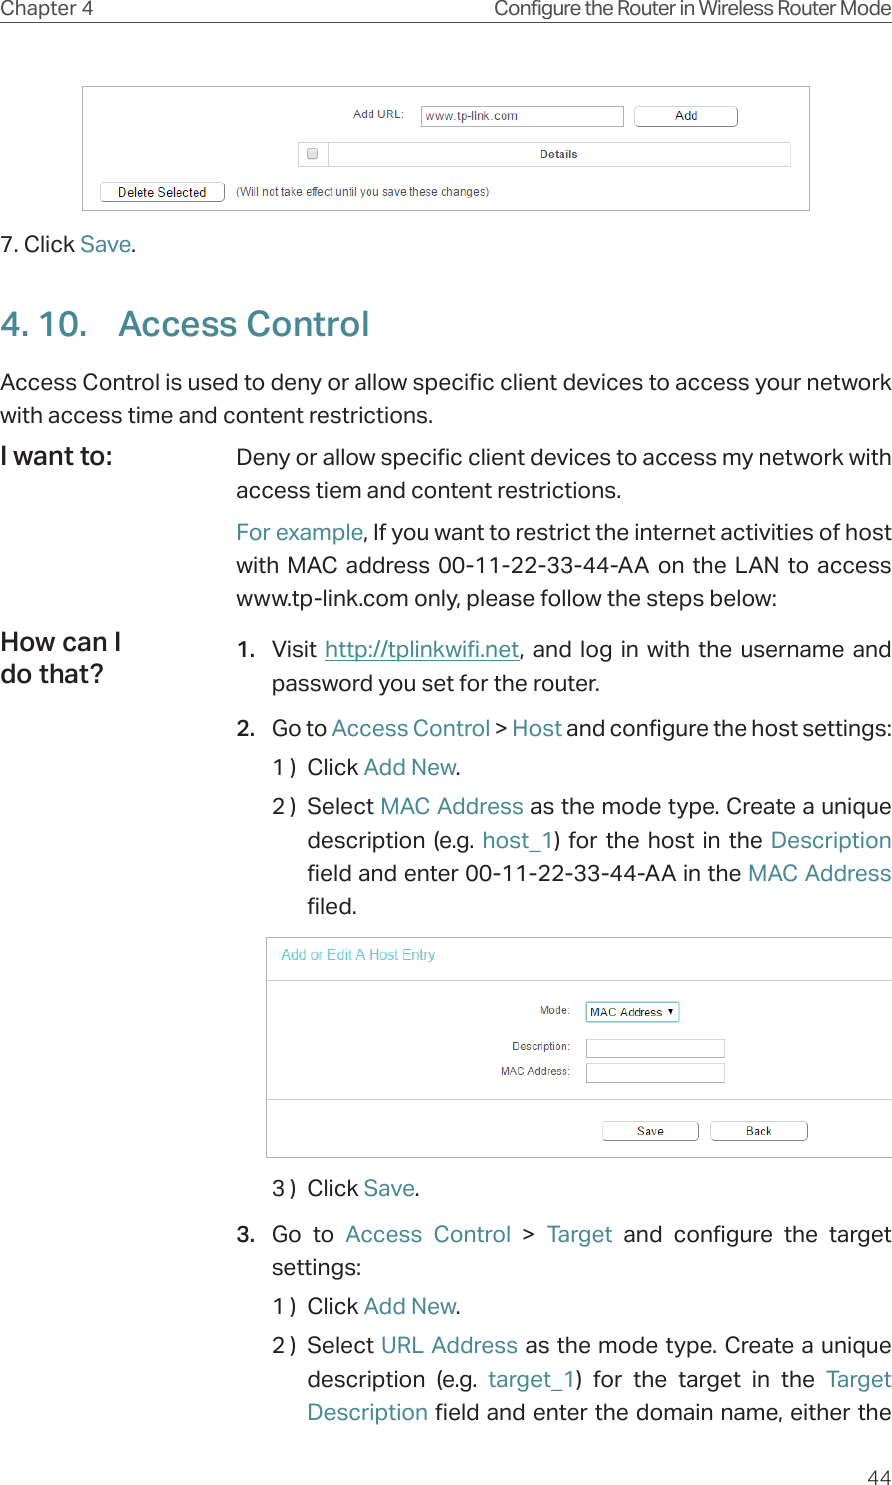 44Chapter 4 Configure the Router in Wireless Router Mode7. Click Save.4. 10.  Access ControlAccess Control is used to deny or allow specific client devices to access your network with access time and content restrictions.Deny or allow specific client devices to access my network with access tiem and content restrictions.For example, If you want to restrict the internet activities of host with MAC address 00-11-22-33-44-AA on the LAN to access www.tp-link.com only, please follow the steps below:1.  Visit  http://tplinkwifi.net, and log in with the username and password you set for the router.2.  Go to Access Control &gt; Host and configure the host settings:1 )  Click Add New.2 )  Select MAC Address as the mode type. Create a unique description (e.g. host_1) for the host in the Description field and enter 00-11-22-33-44-AA in the MAC Address filed.3 )  Click Save.3.  Go to Access Control &gt; Target and configure the target settings:1 )  Click Add New.2 )  Select URL Address as the mode type. Create a unique description (e.g. target_1) for the target in the Target Description field and enter the domain name, either the I want to:How can I do that?